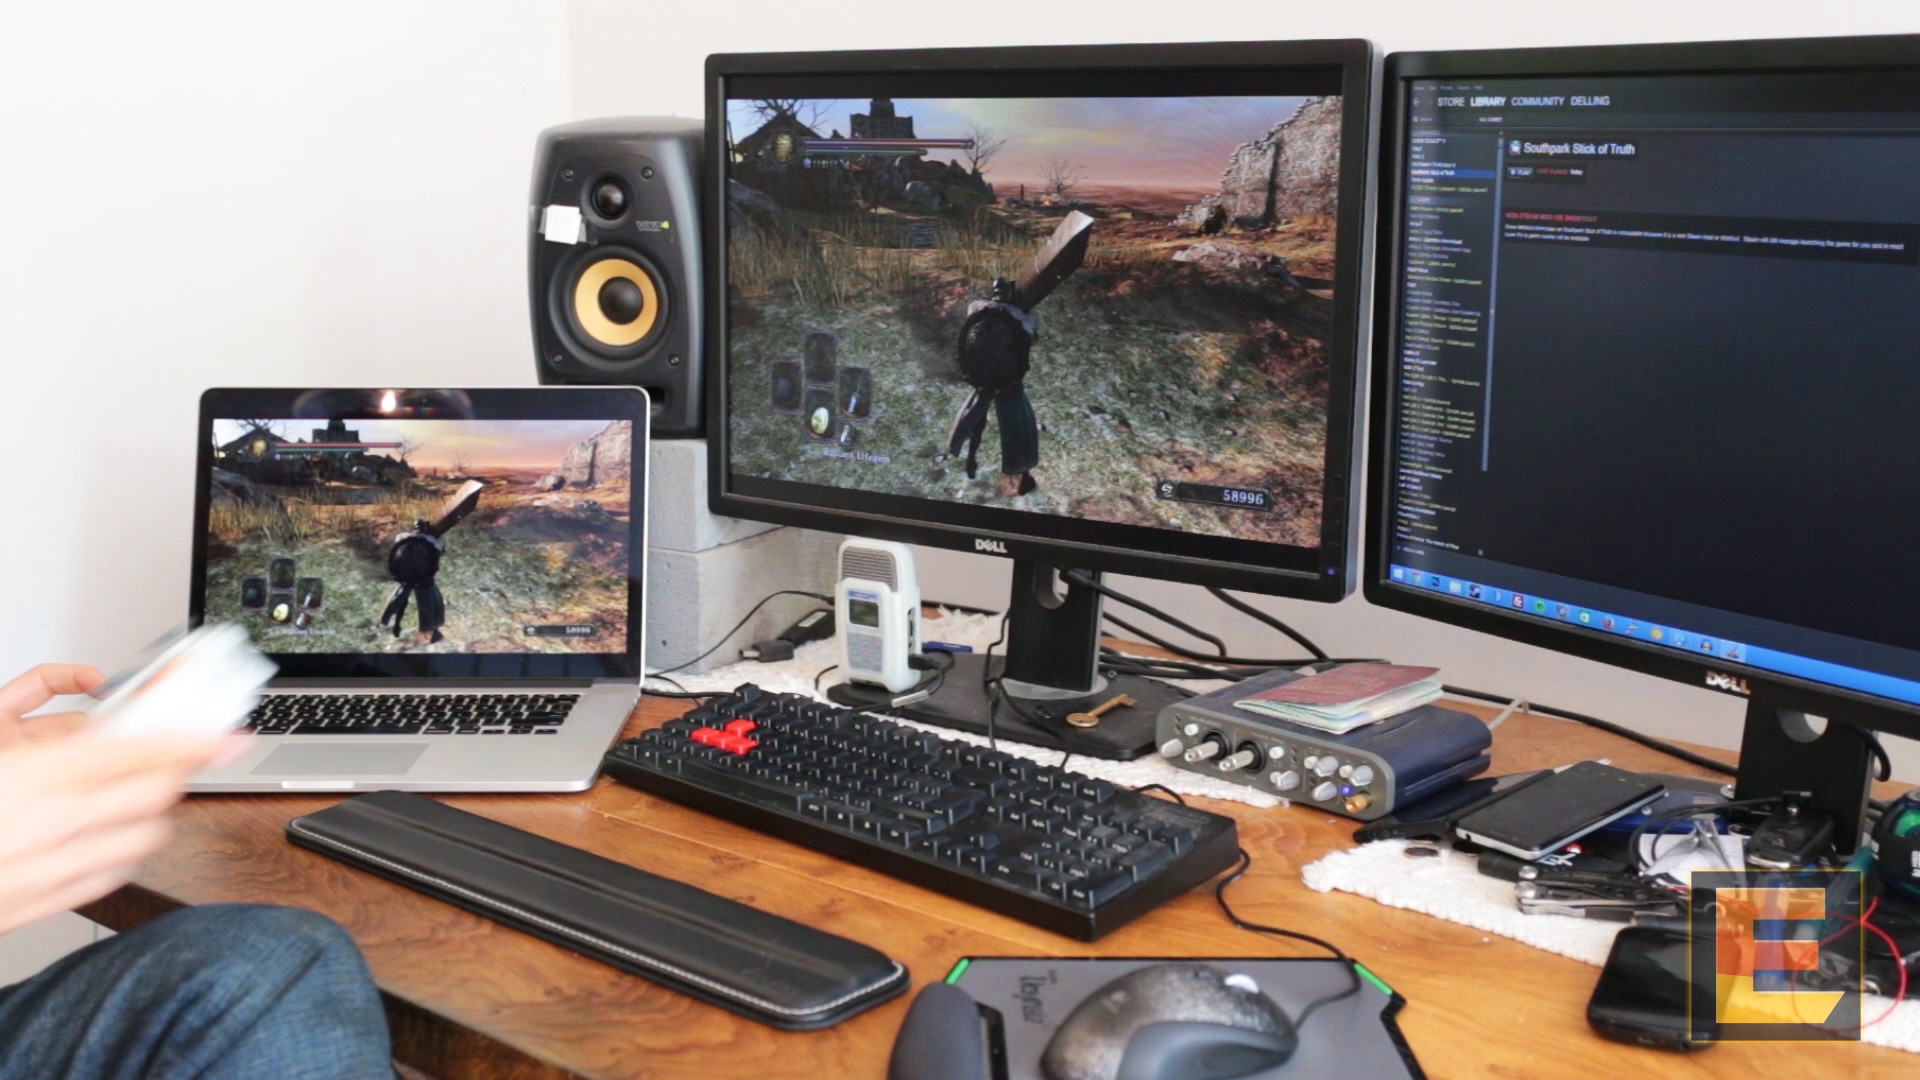 best games for mac on steam 2014